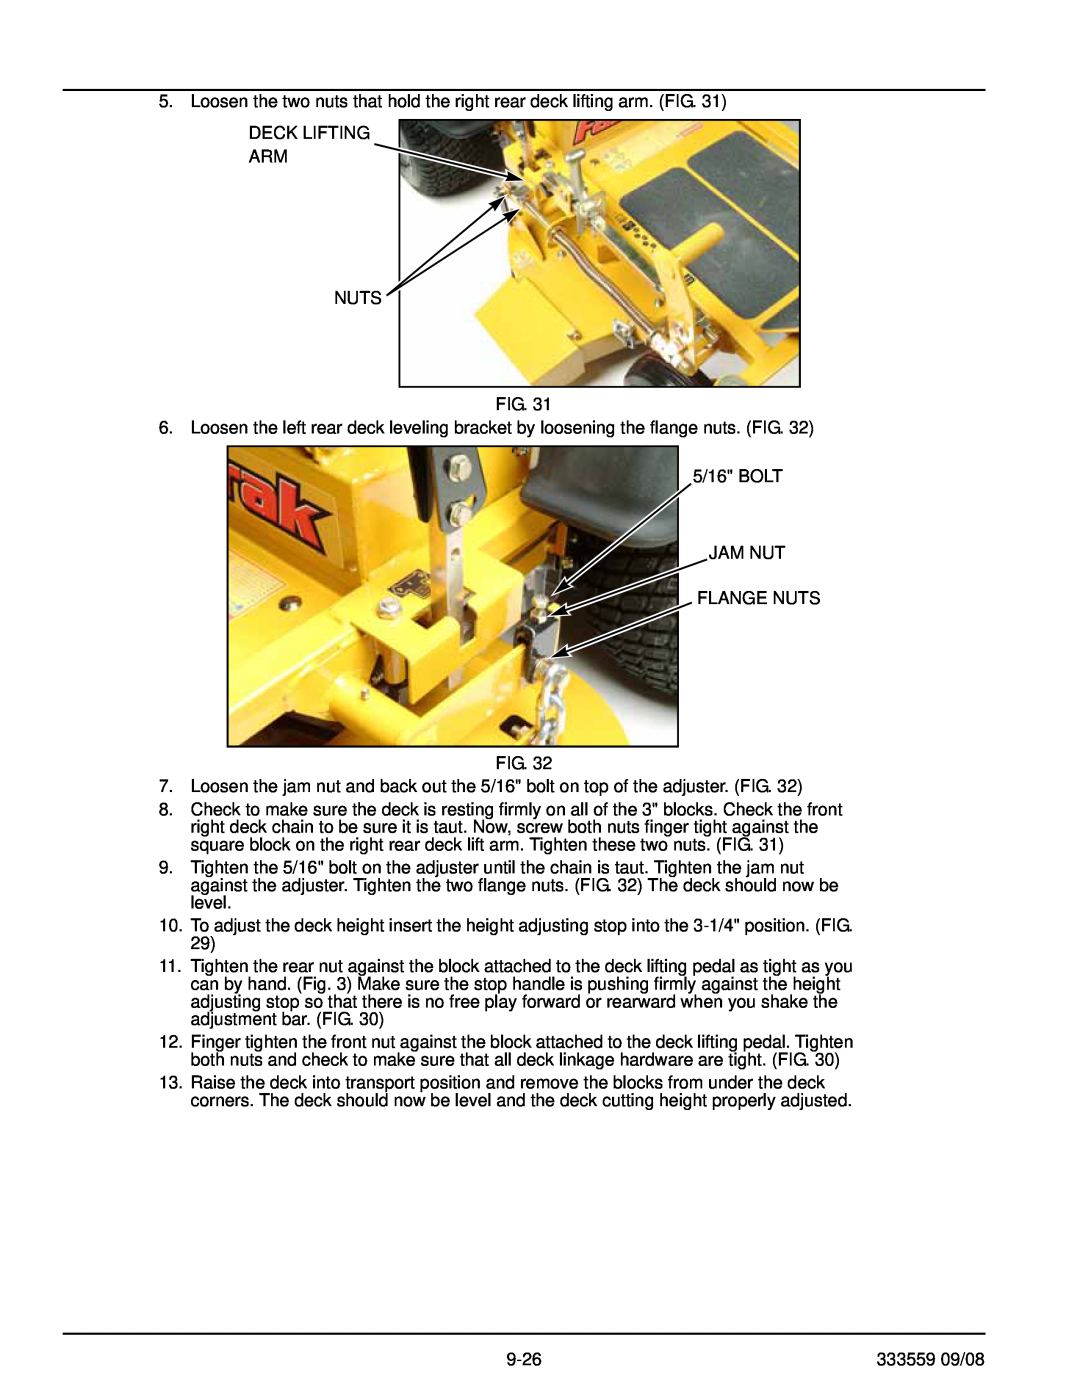 Hustler Turf none manual Loosen the two nuts that hold the right rear deck lifting arm. FIG, Deck Lifting Arm Nuts, 9-26 